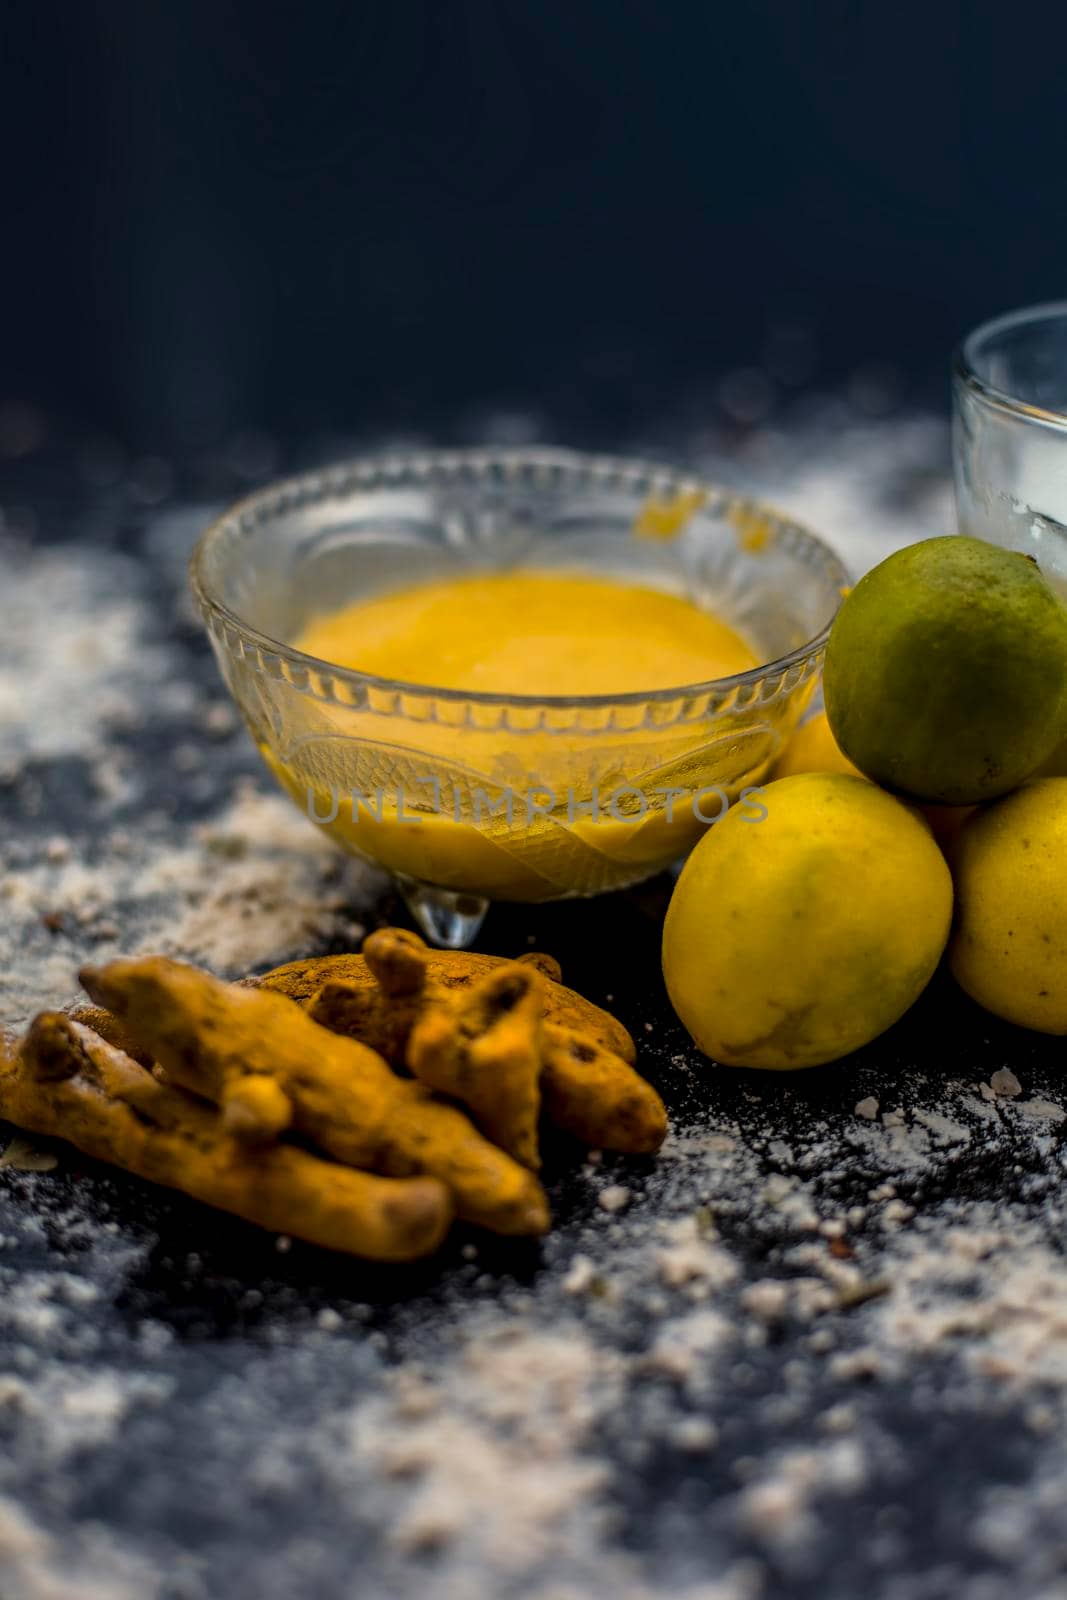 Lemon face mask on the wooden surface consisting lemon juice, gram flour or chickpea flour, turmeric or Haldi and milk in a glass bowl.For the treatment of tans. by mirzamlk